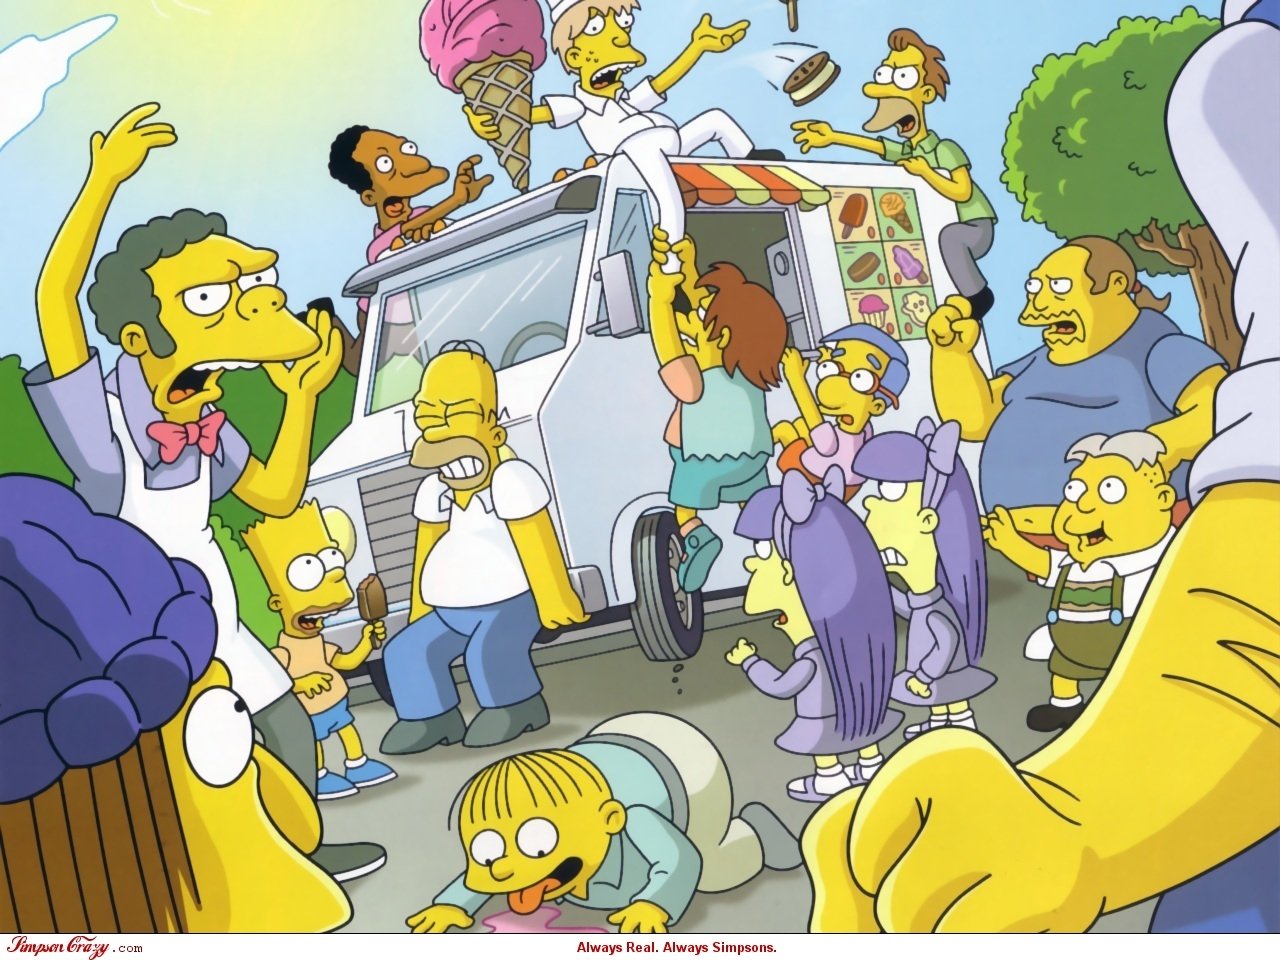 The Simpsons Image Id 387148 Image Abyss